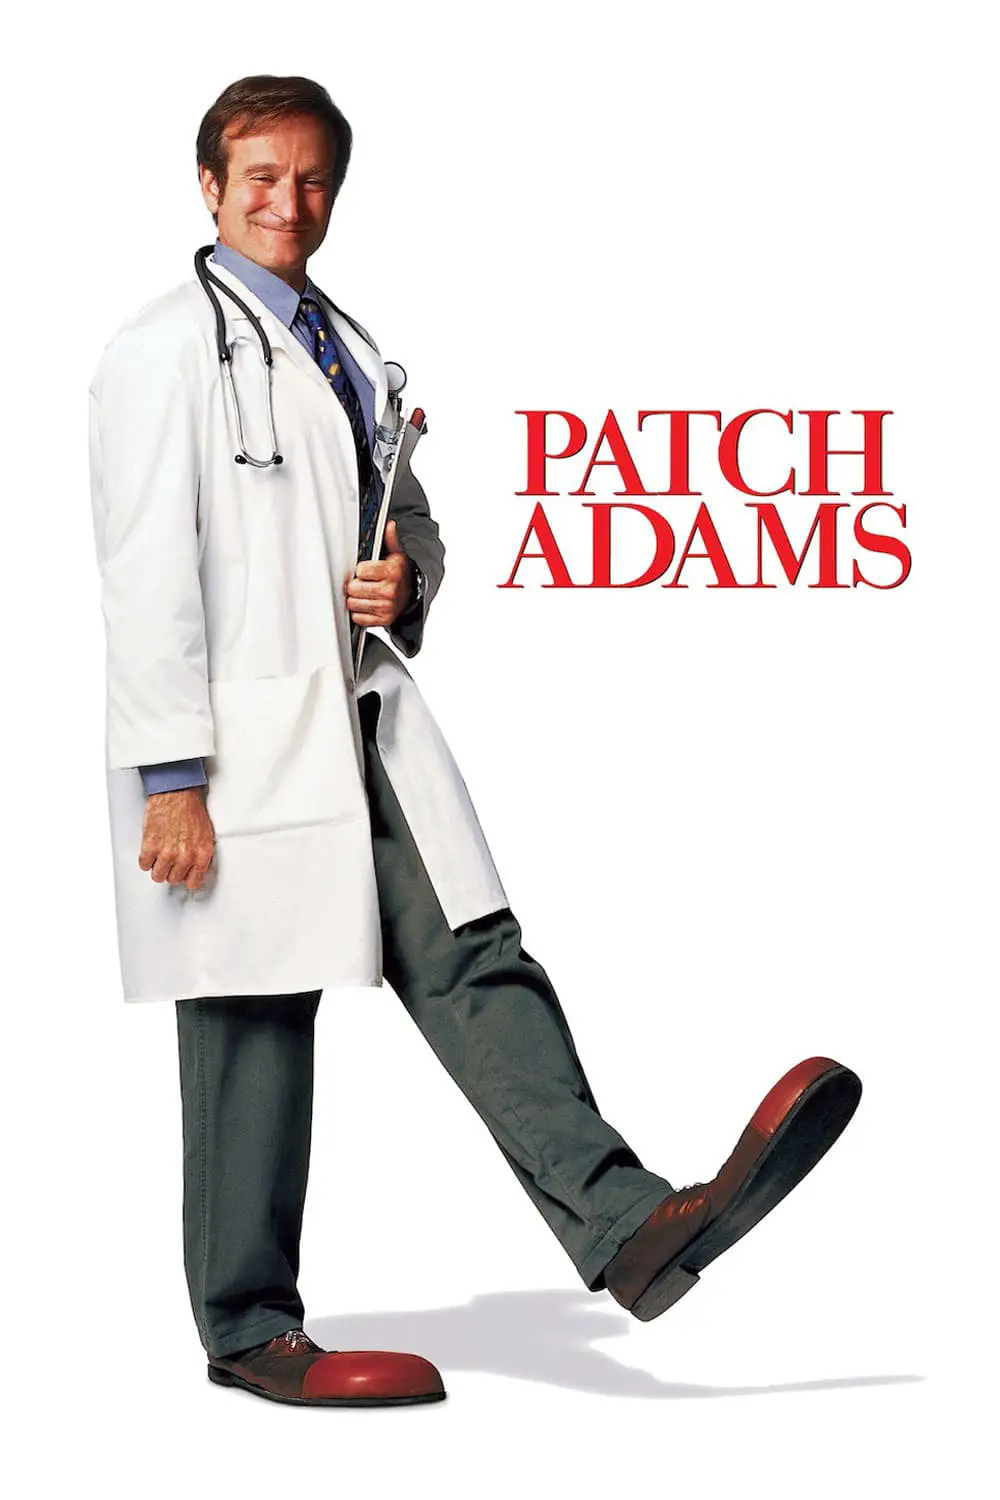 You are currently viewing Patch Adams